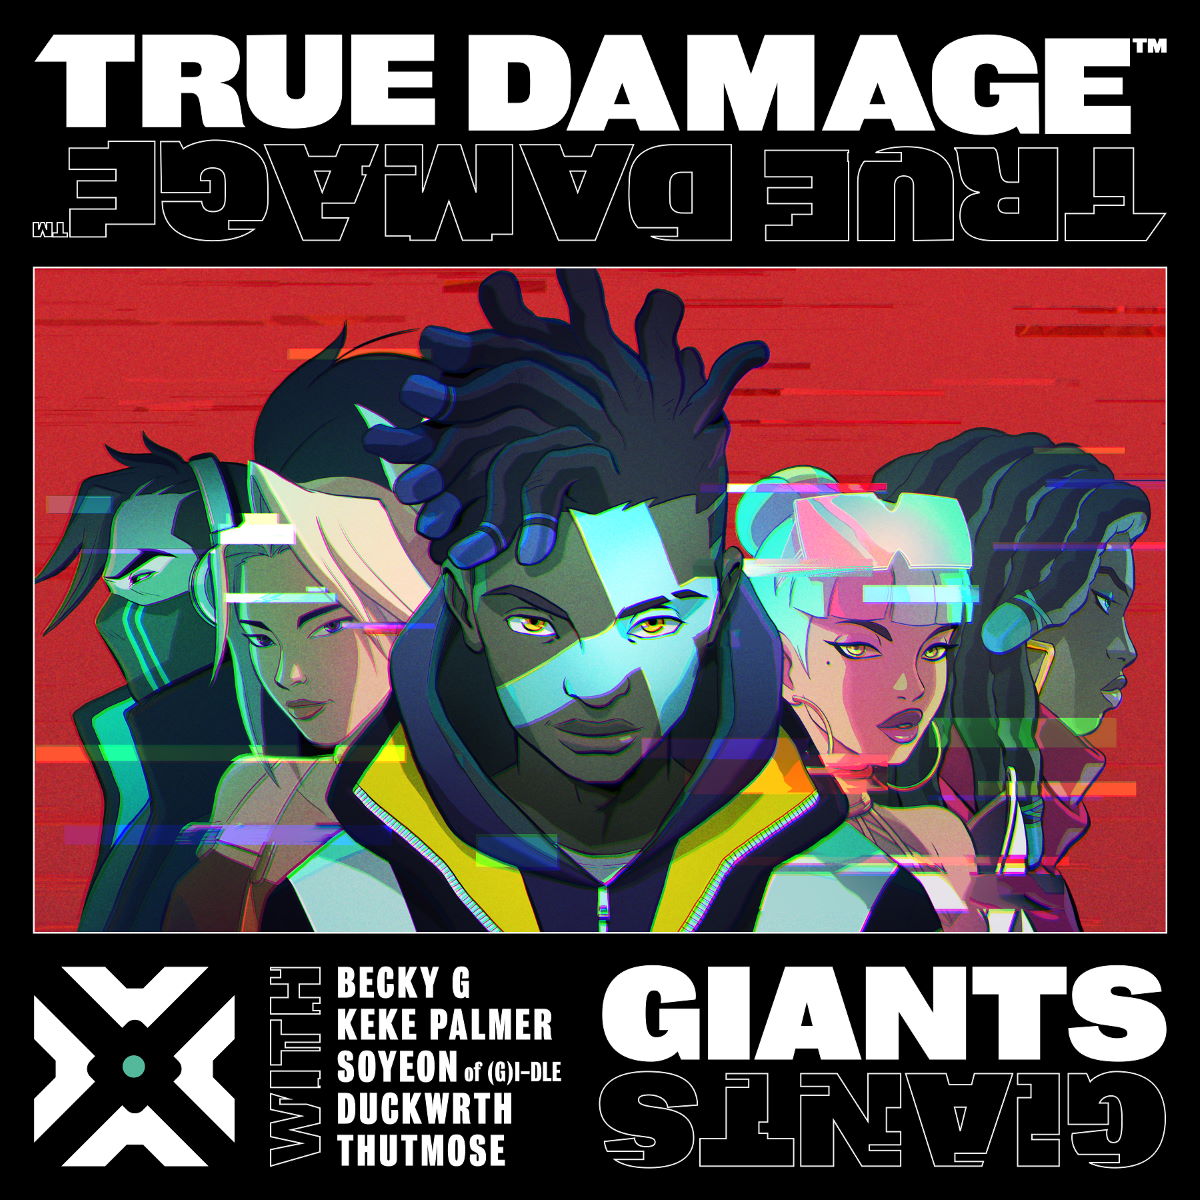 Cover art for『True Damage - GIANTS』from the release『GIANTS』